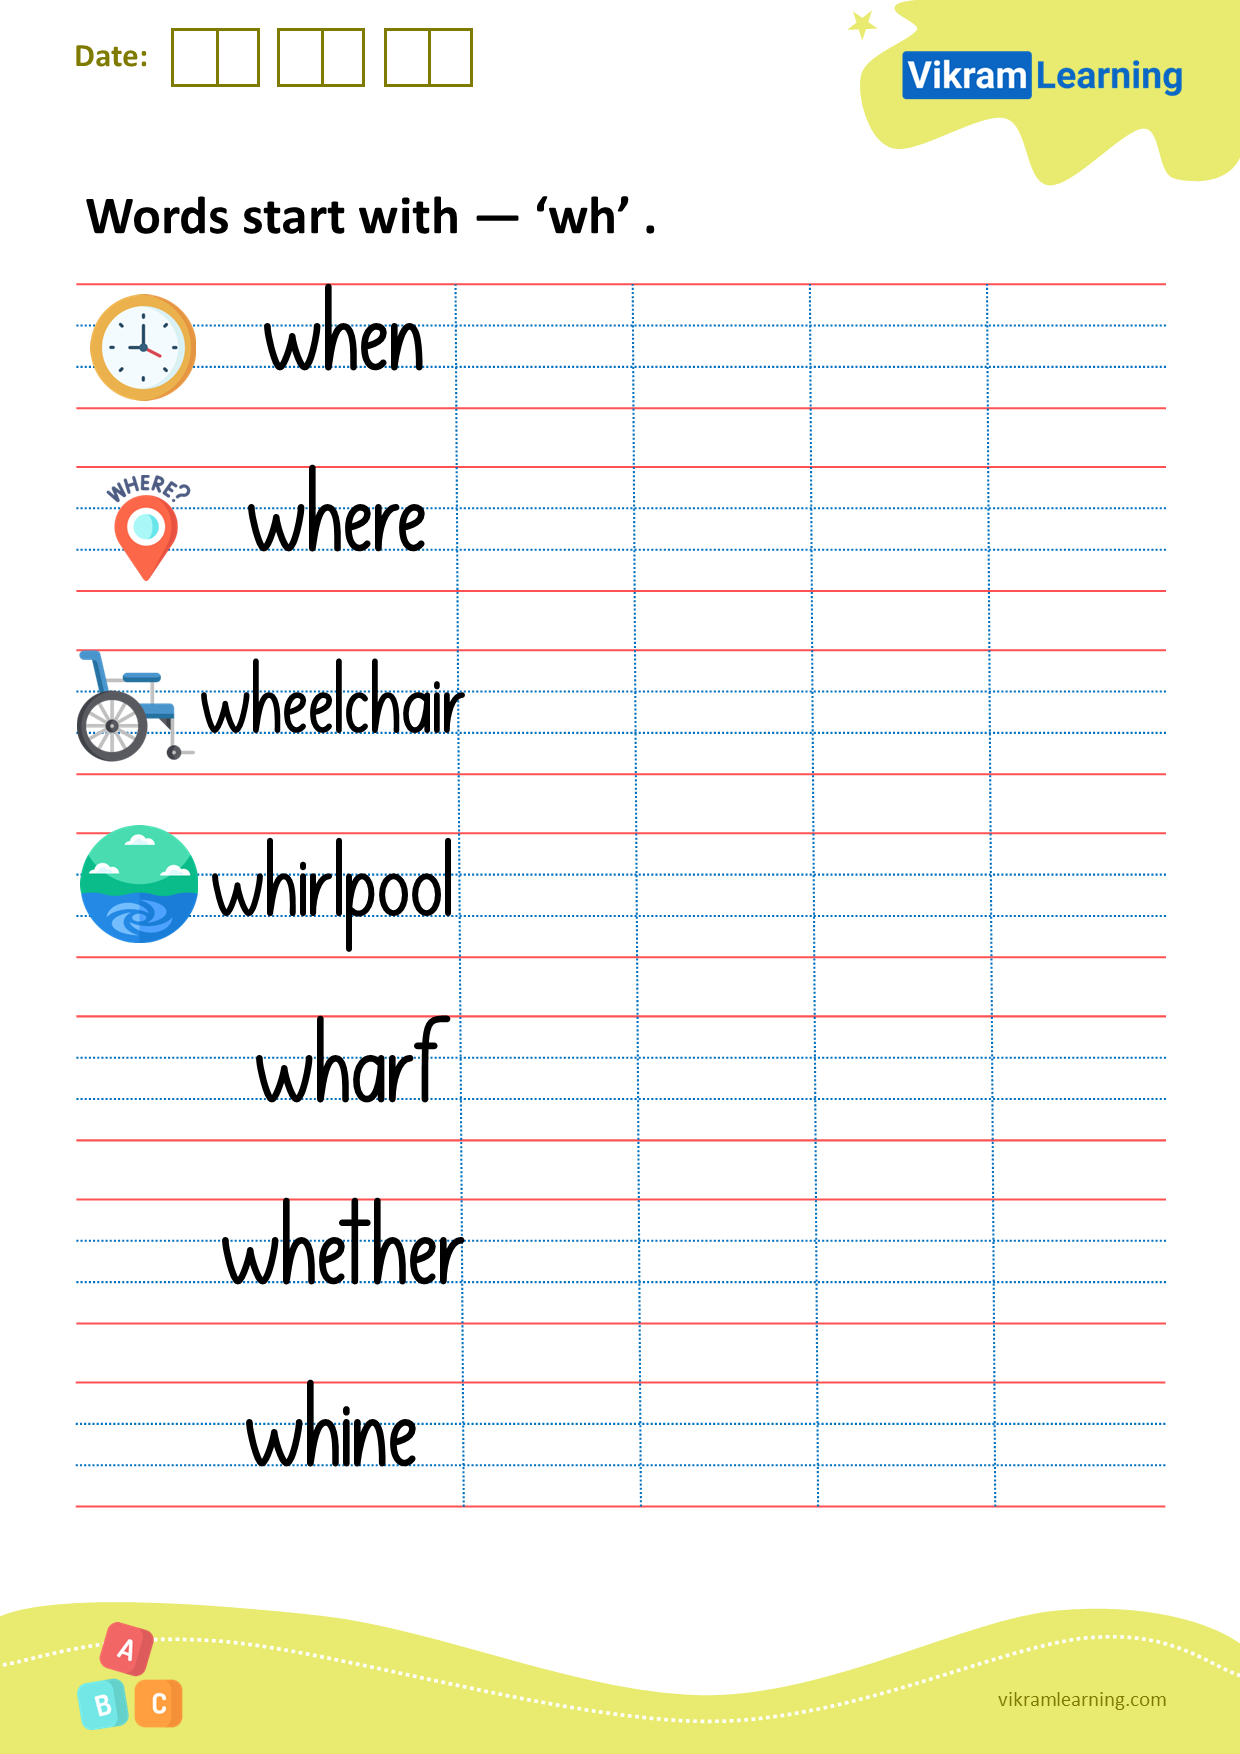 Download words starting with — ‘wh’ worksheets